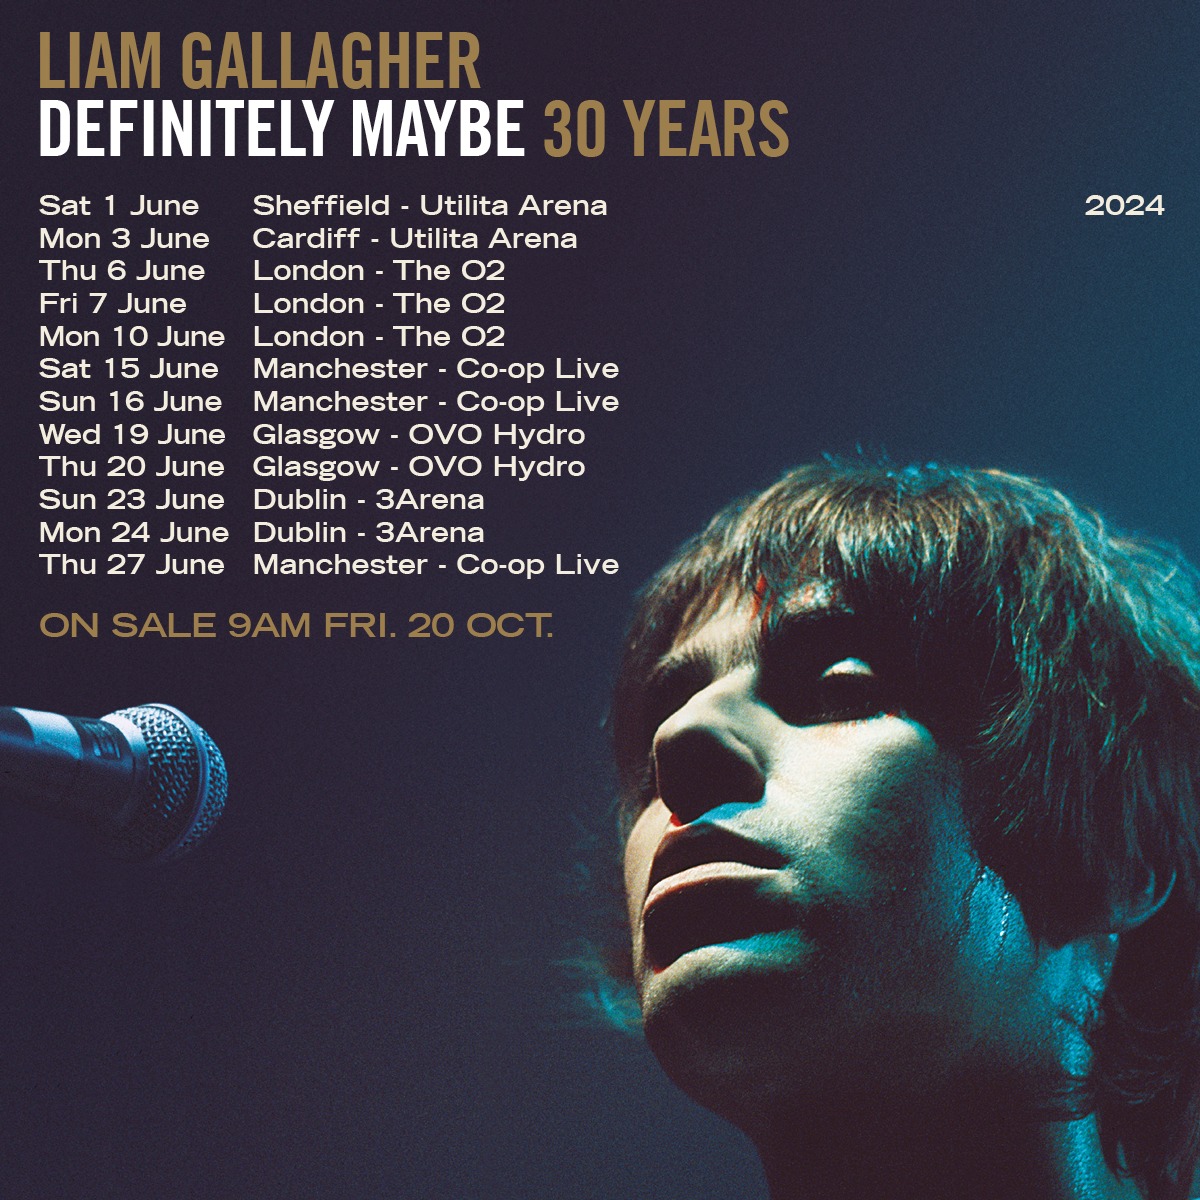 Liam Gallagher - Definitely Maybe in der The O2 Arena Tickets